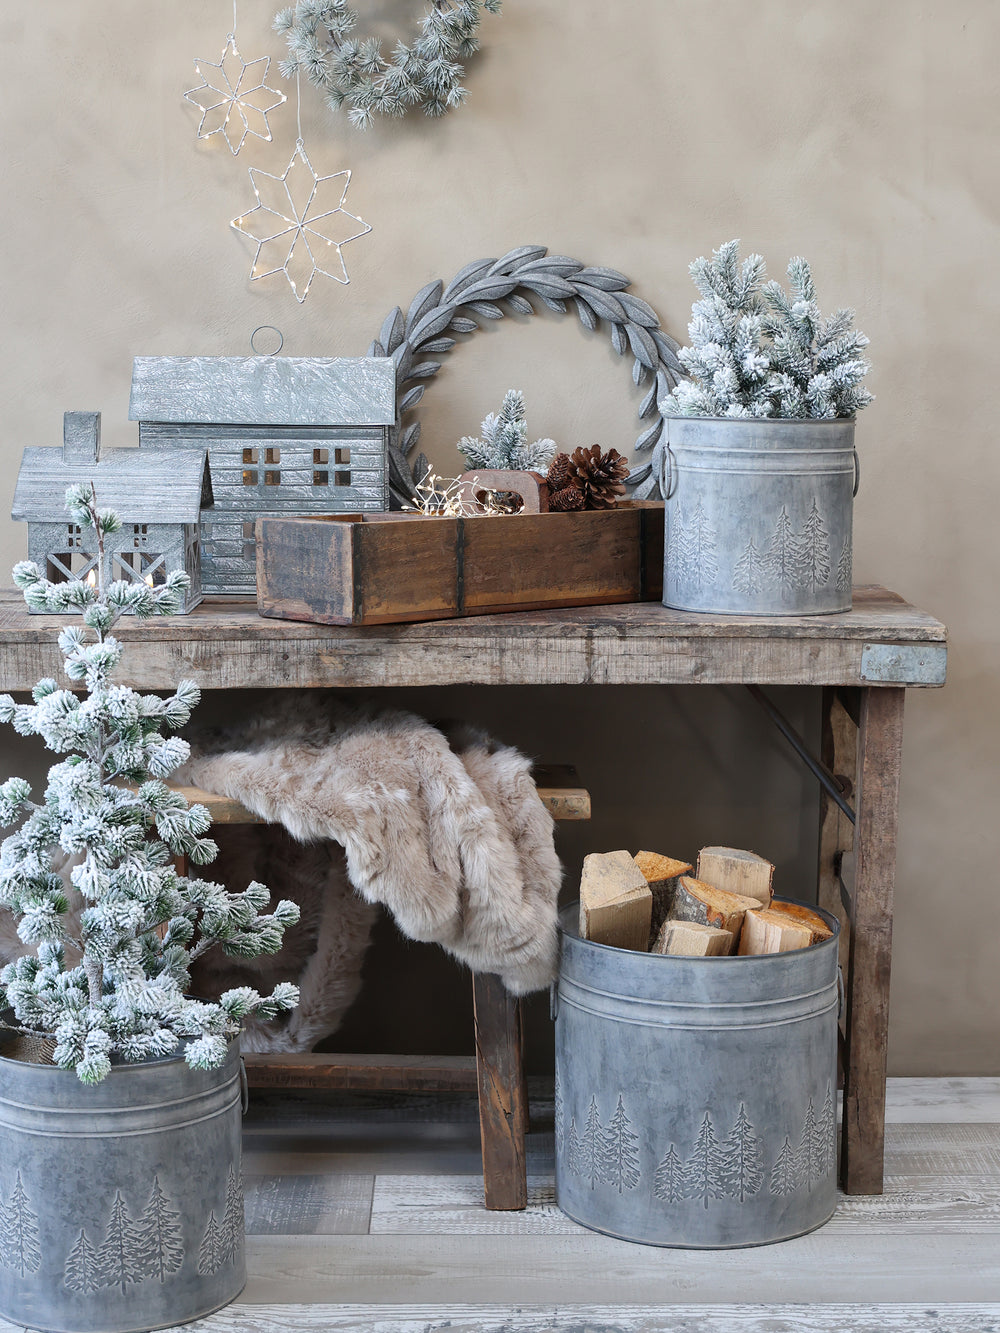 Fir tree zinc buckets filled with Christmas trees and logs with wooden table and bench with fur throw and metal house decorations